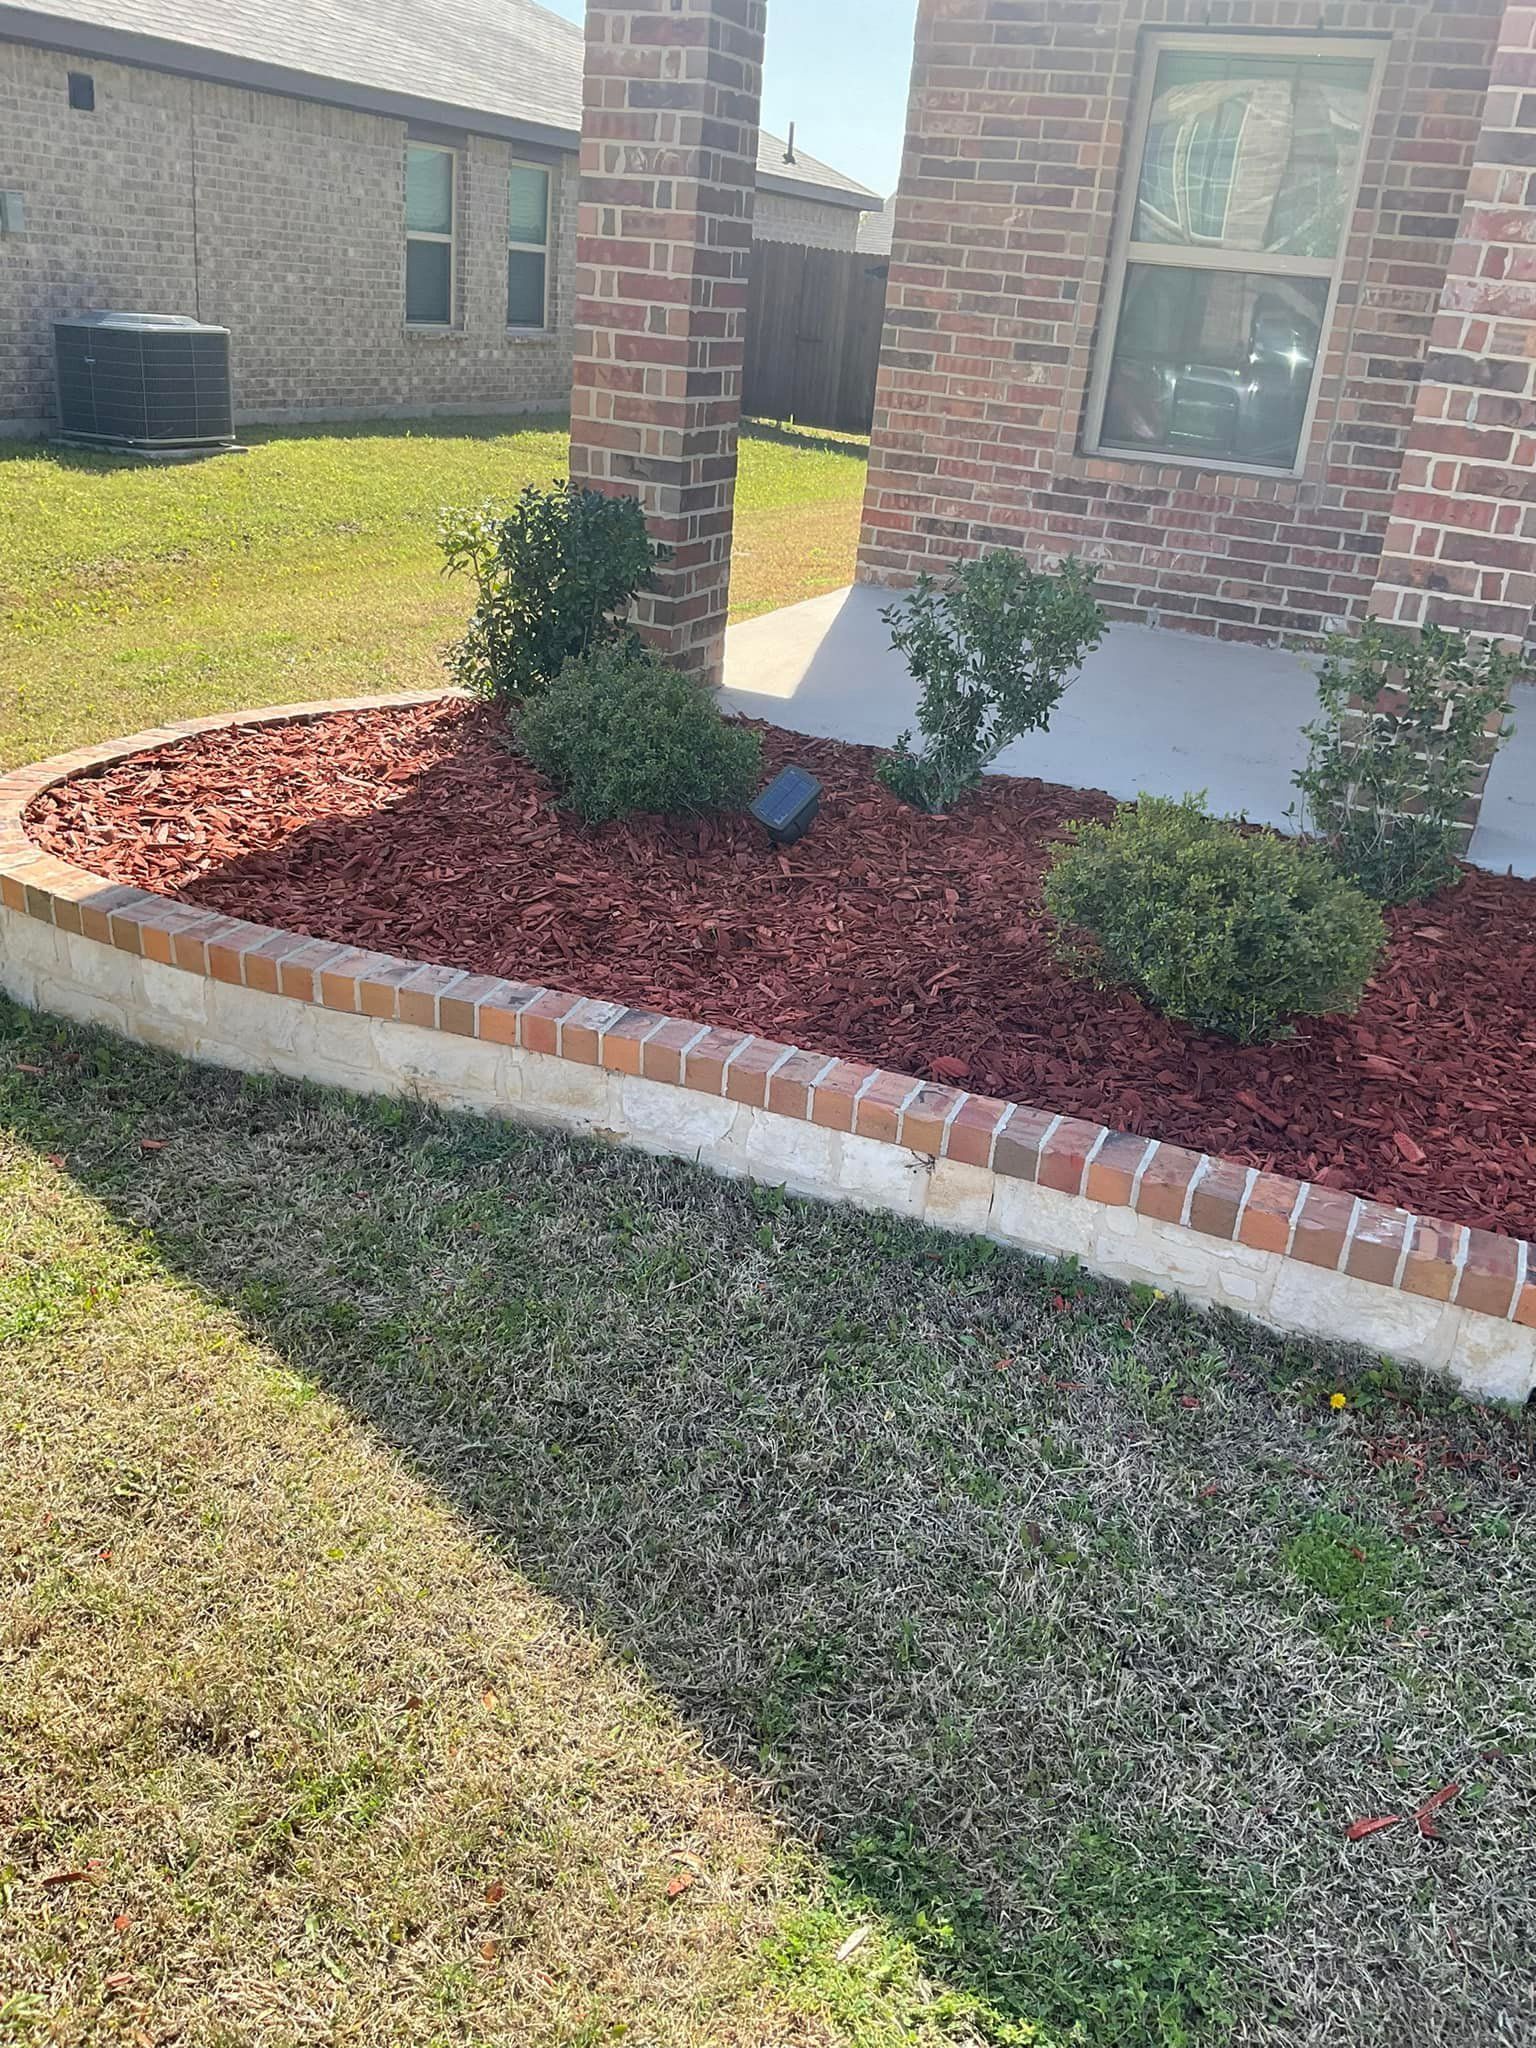 Landscaping for Grass Kickers Lawn Care and Landscaping in Dallas, TX